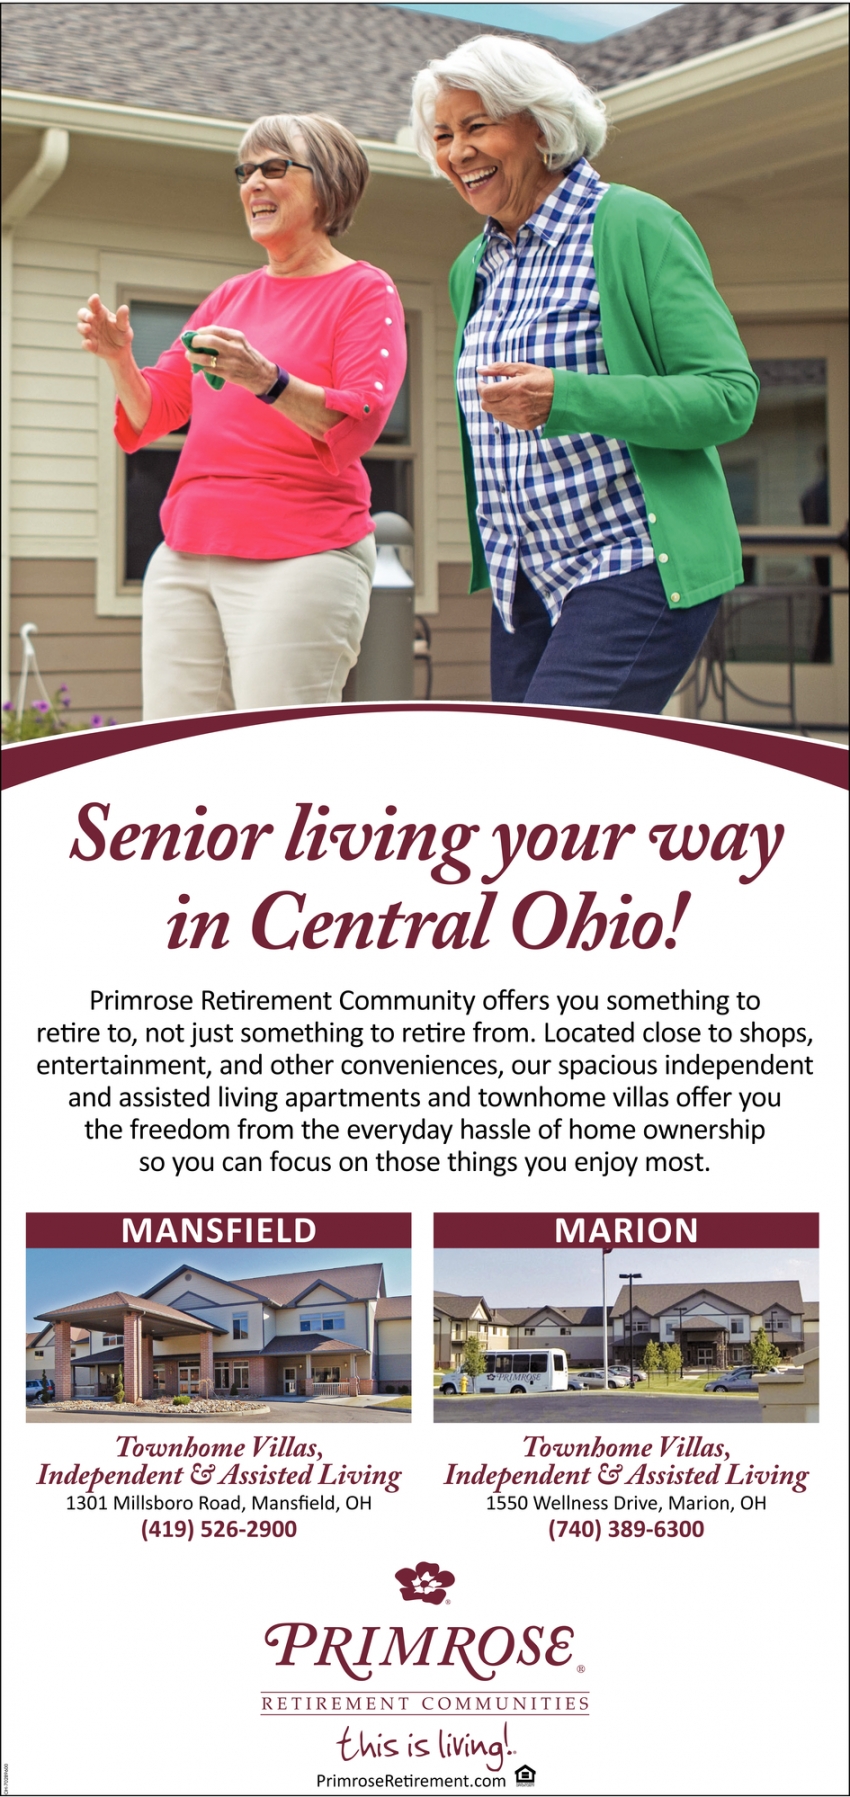 Senior Living Your Way On Central Ohio!